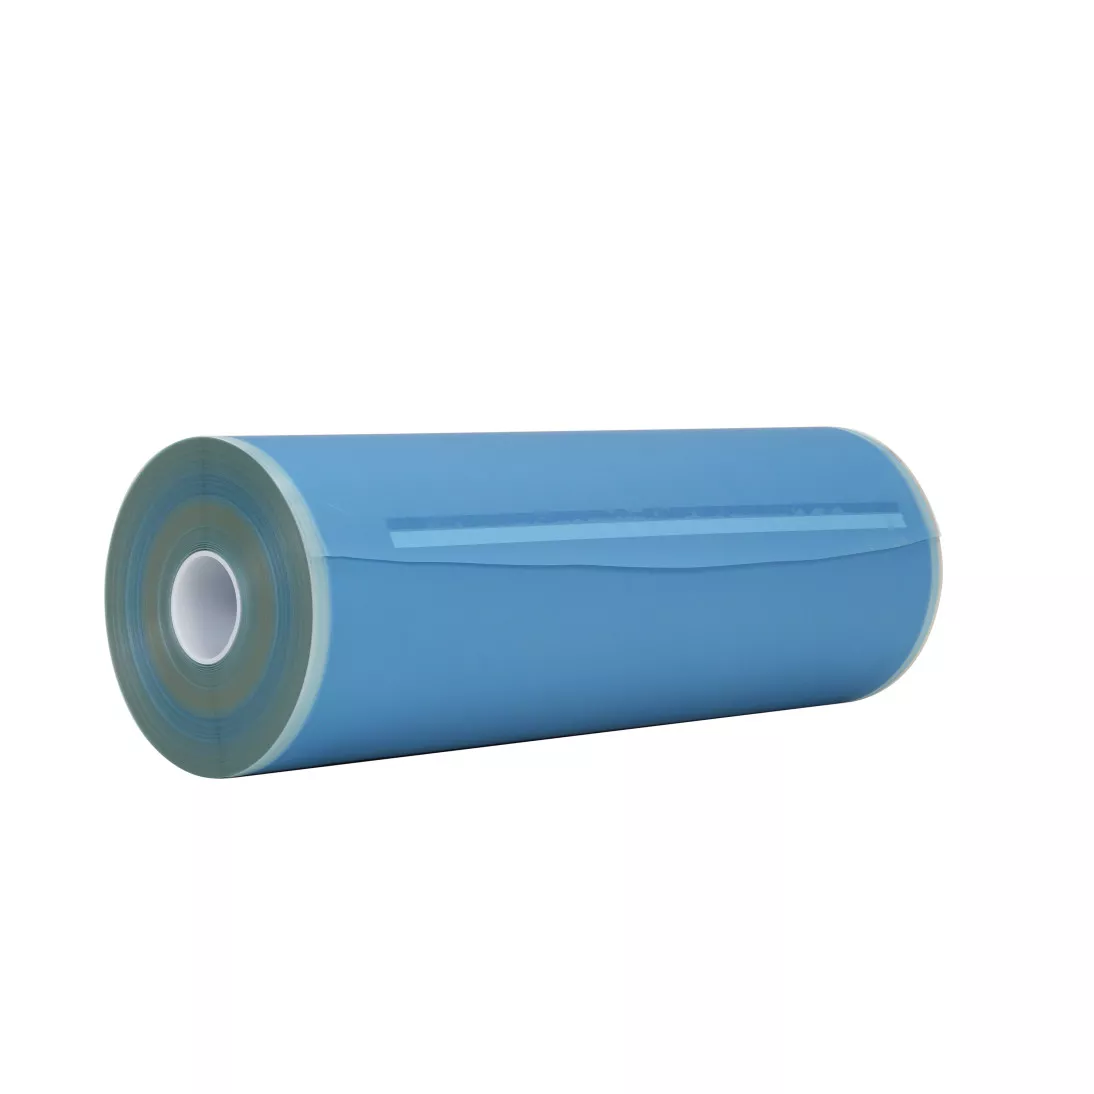 3M™ Lapping Film Type P Roll 364M, 27 in x 1500 ft x 3 in 9 Micron ASO,
1 ea/Case, Restricted